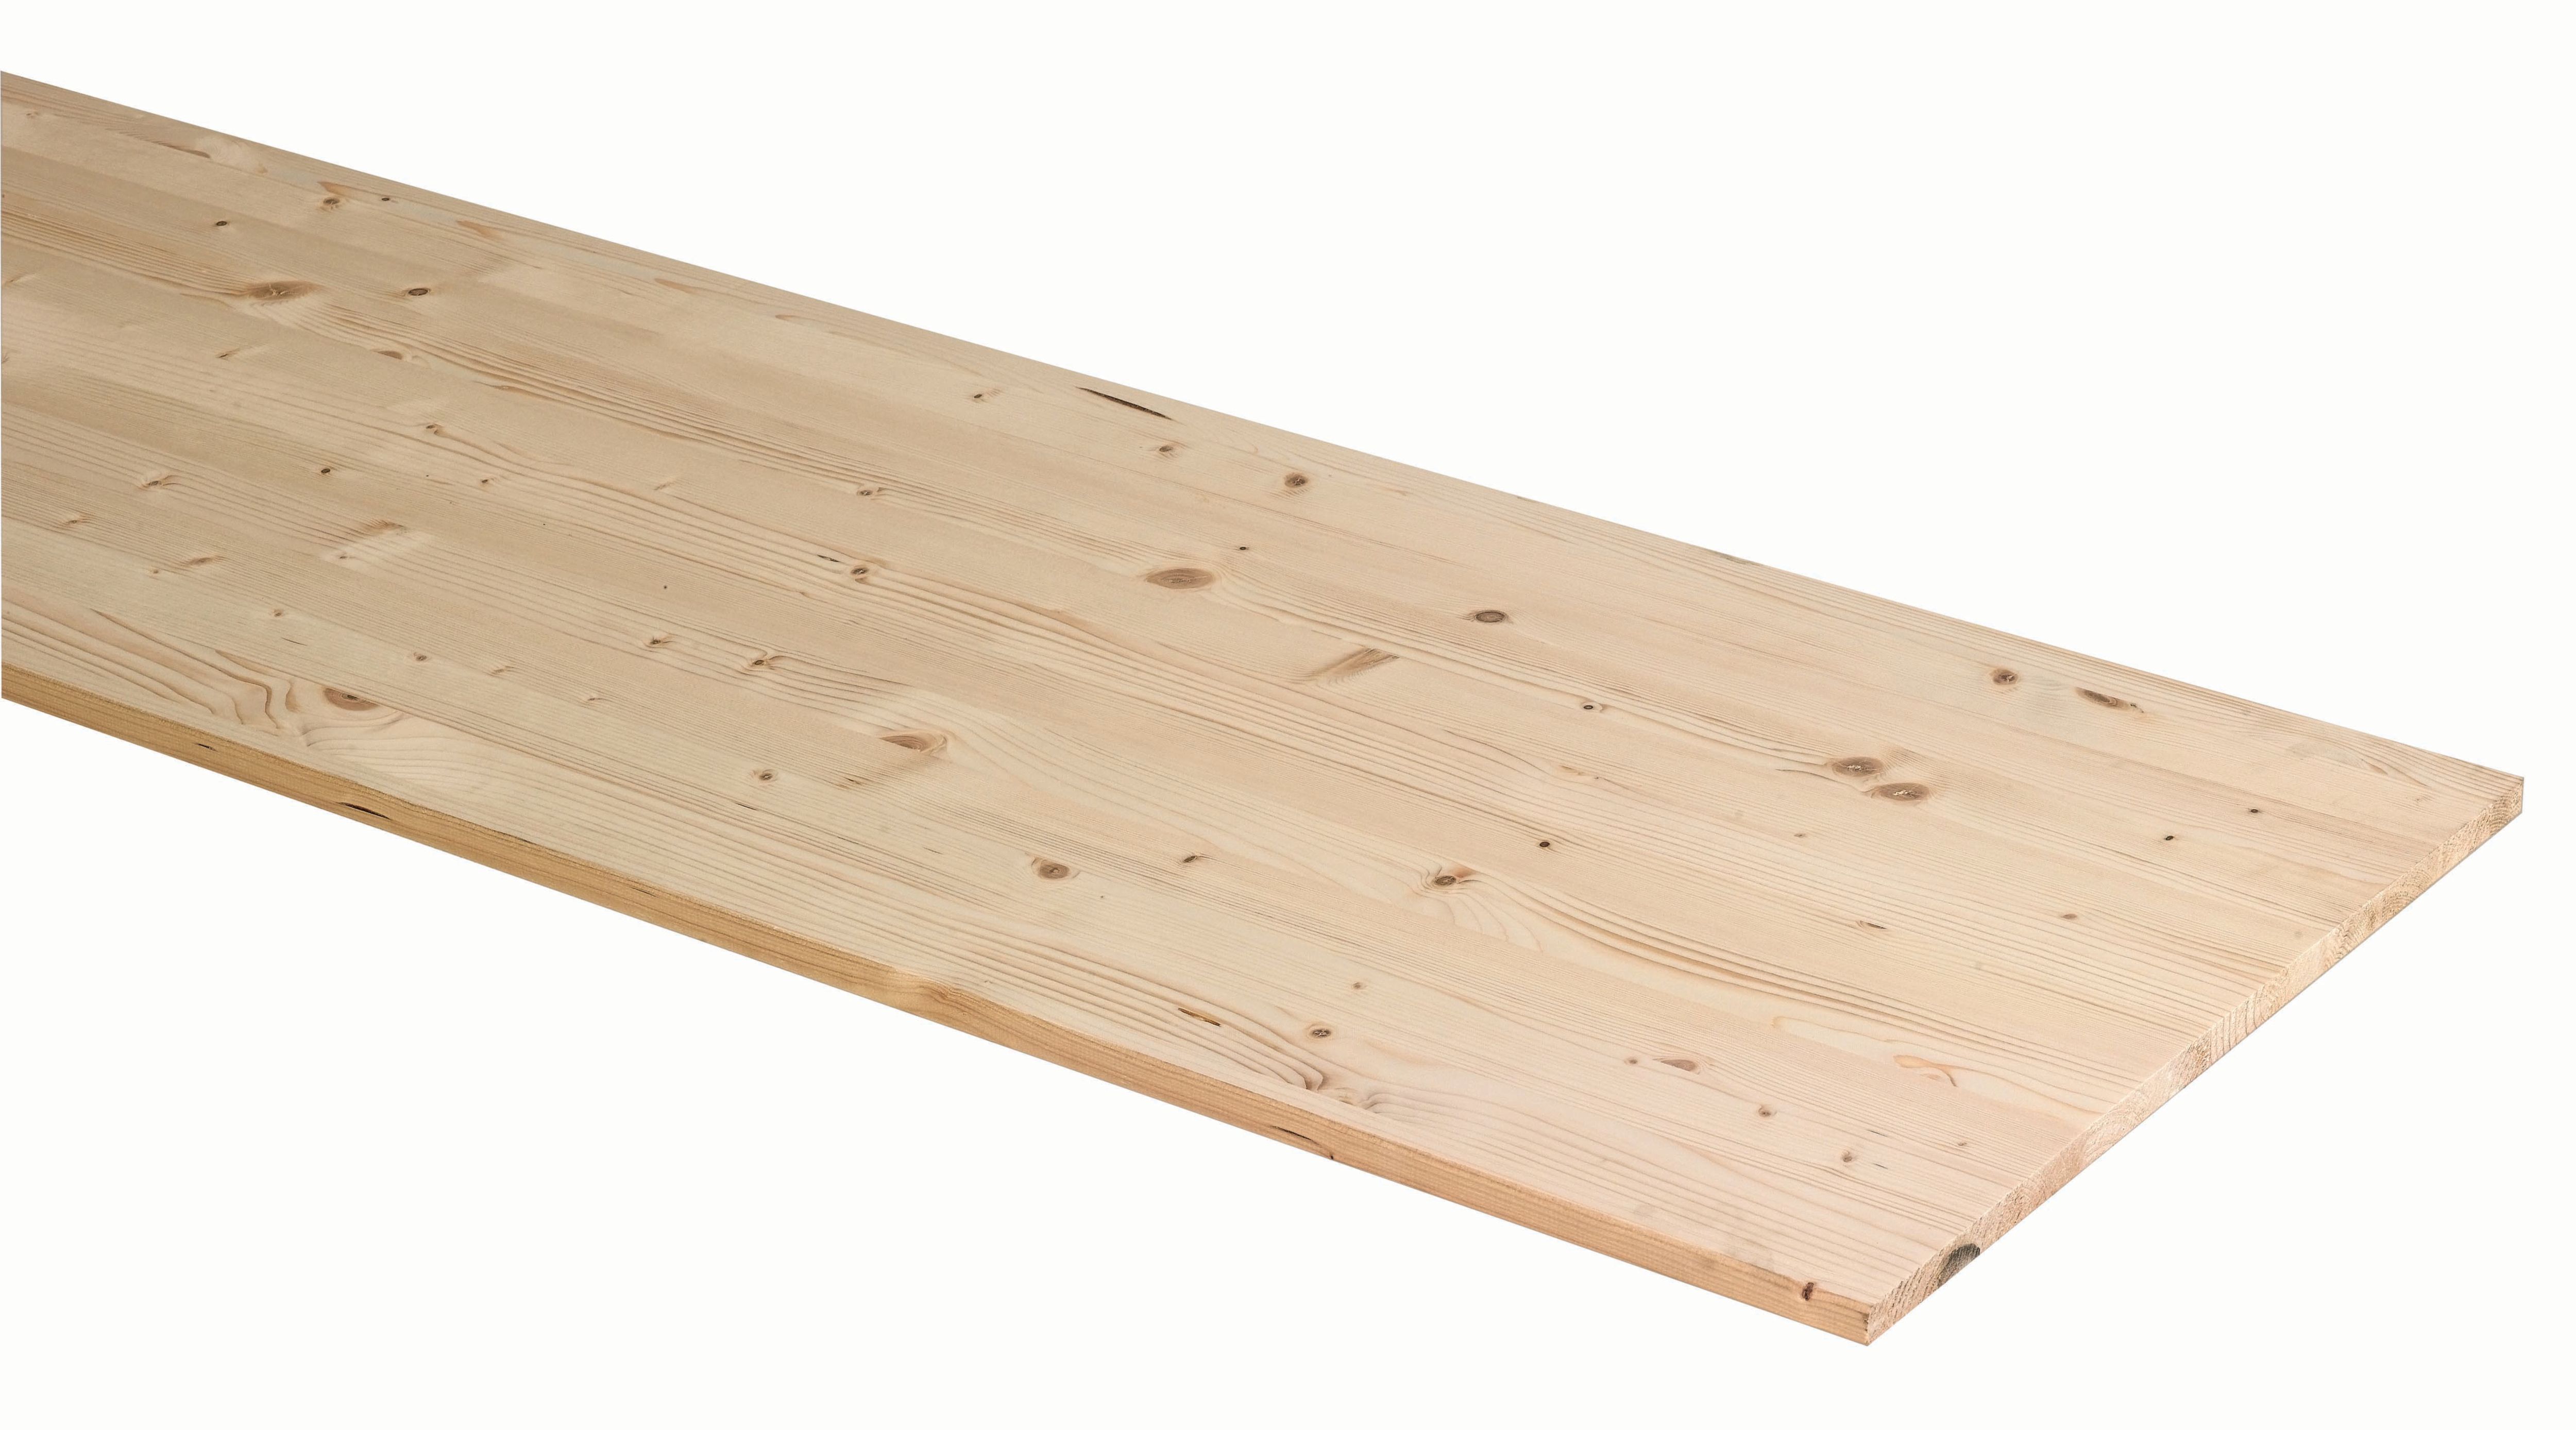 Image of Wickes General Purpose Spruce Timberboard - 18mm x 600mm x 1150mm